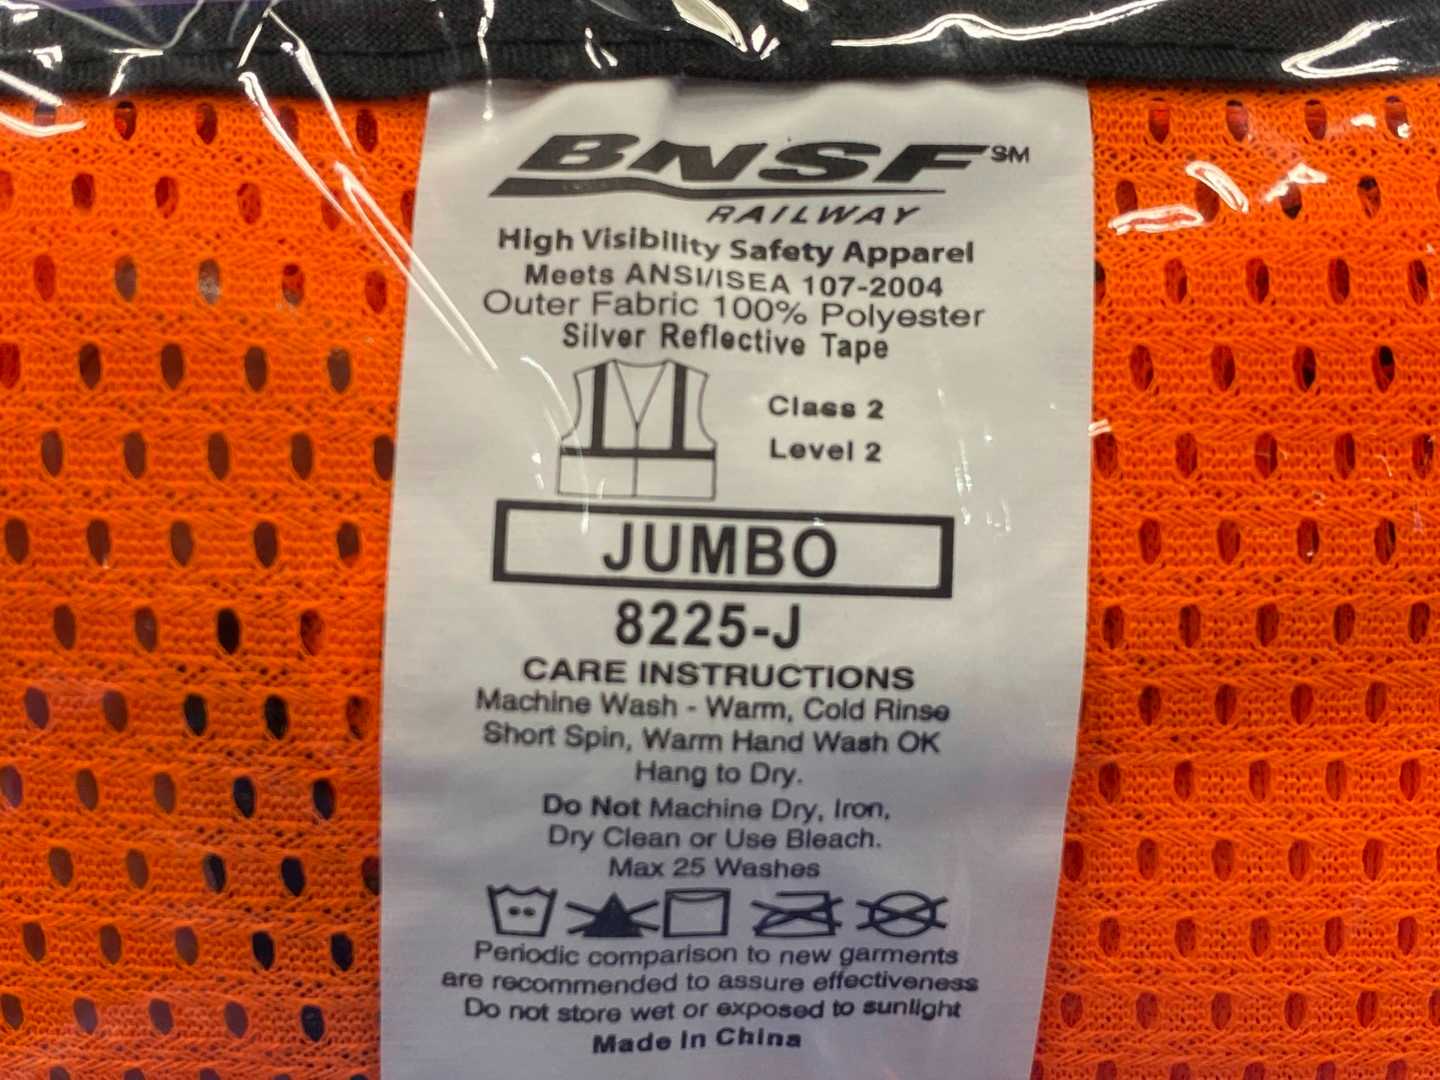 NEW in BOX BNSF Railway Safety Vest Large (Jumbo)